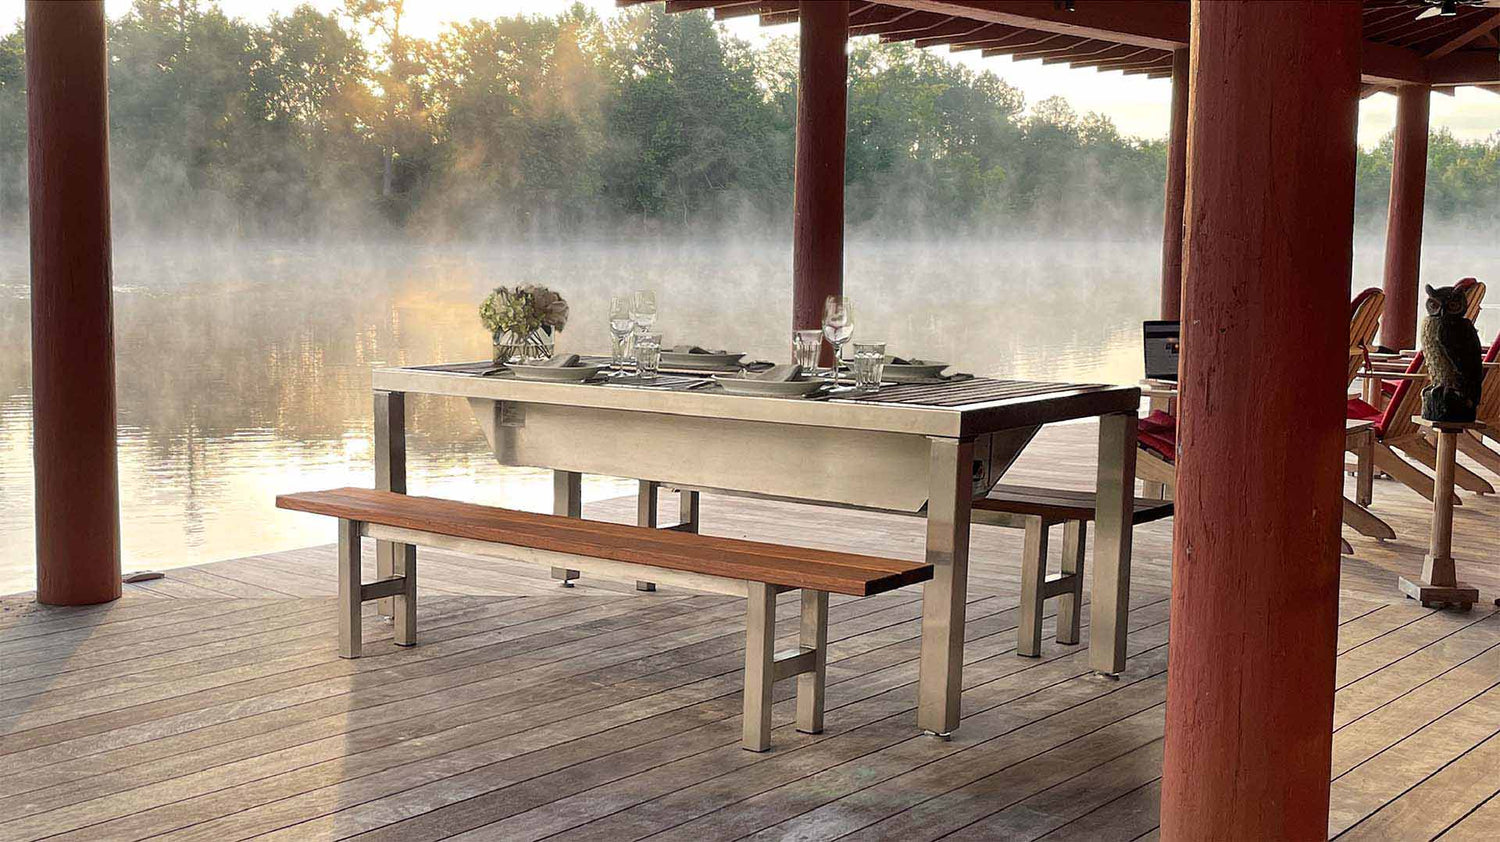 Outdoor Grilling table similar to Guy Ritchie's BBQ Grill Table in The Gentlemen